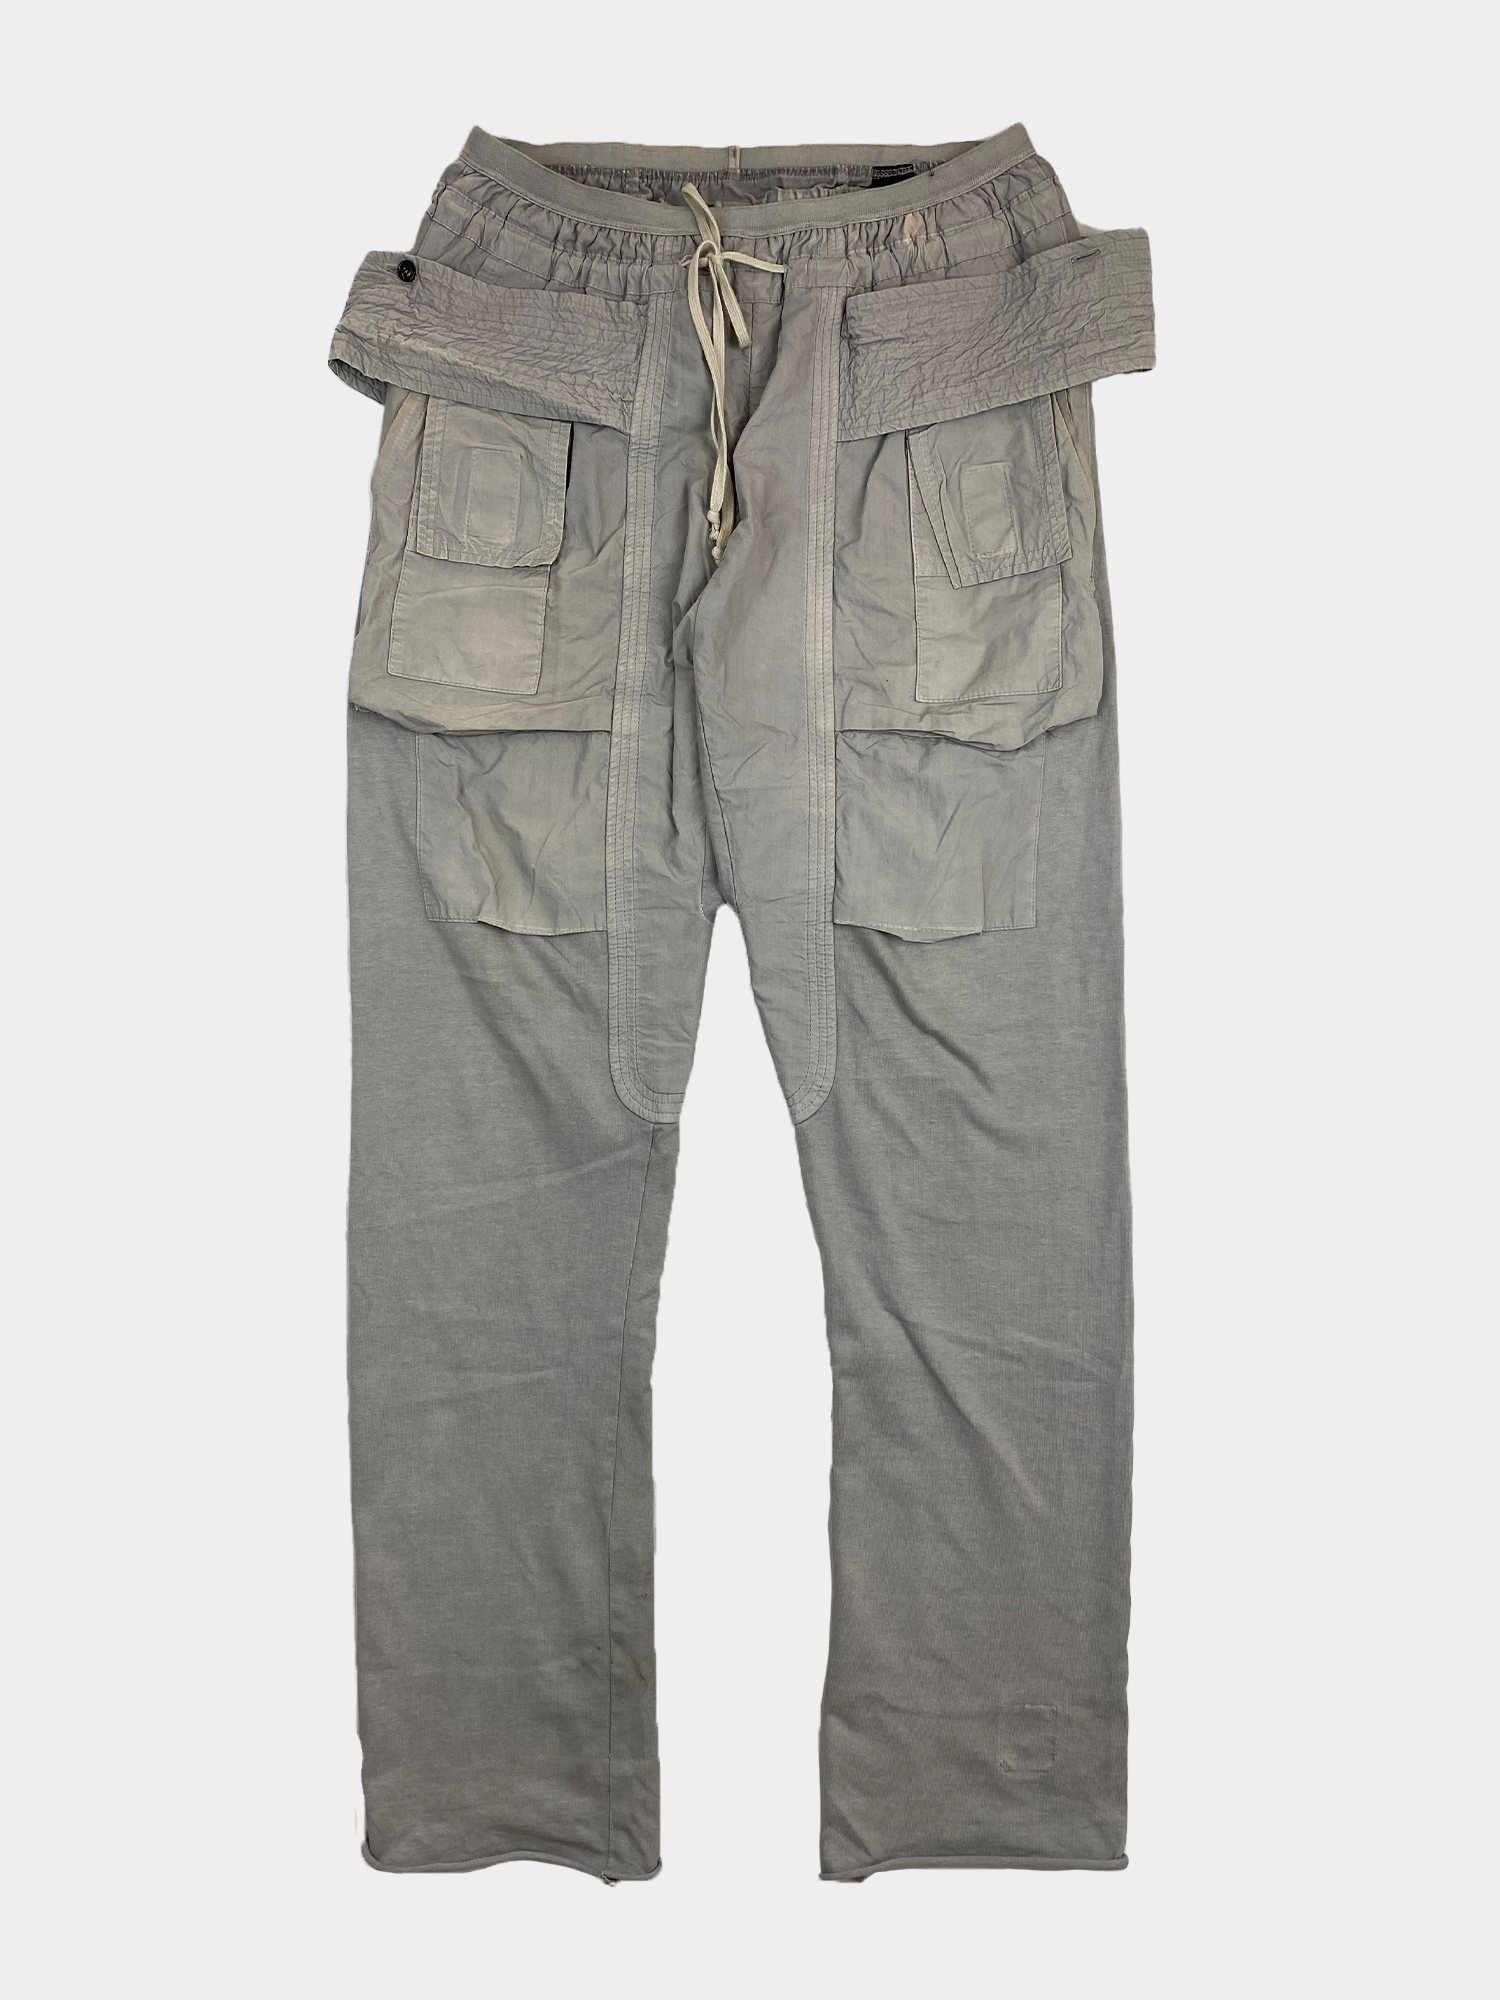 RICK OWENS Creatch Cargo Pants F/W07 - ARCHIVED